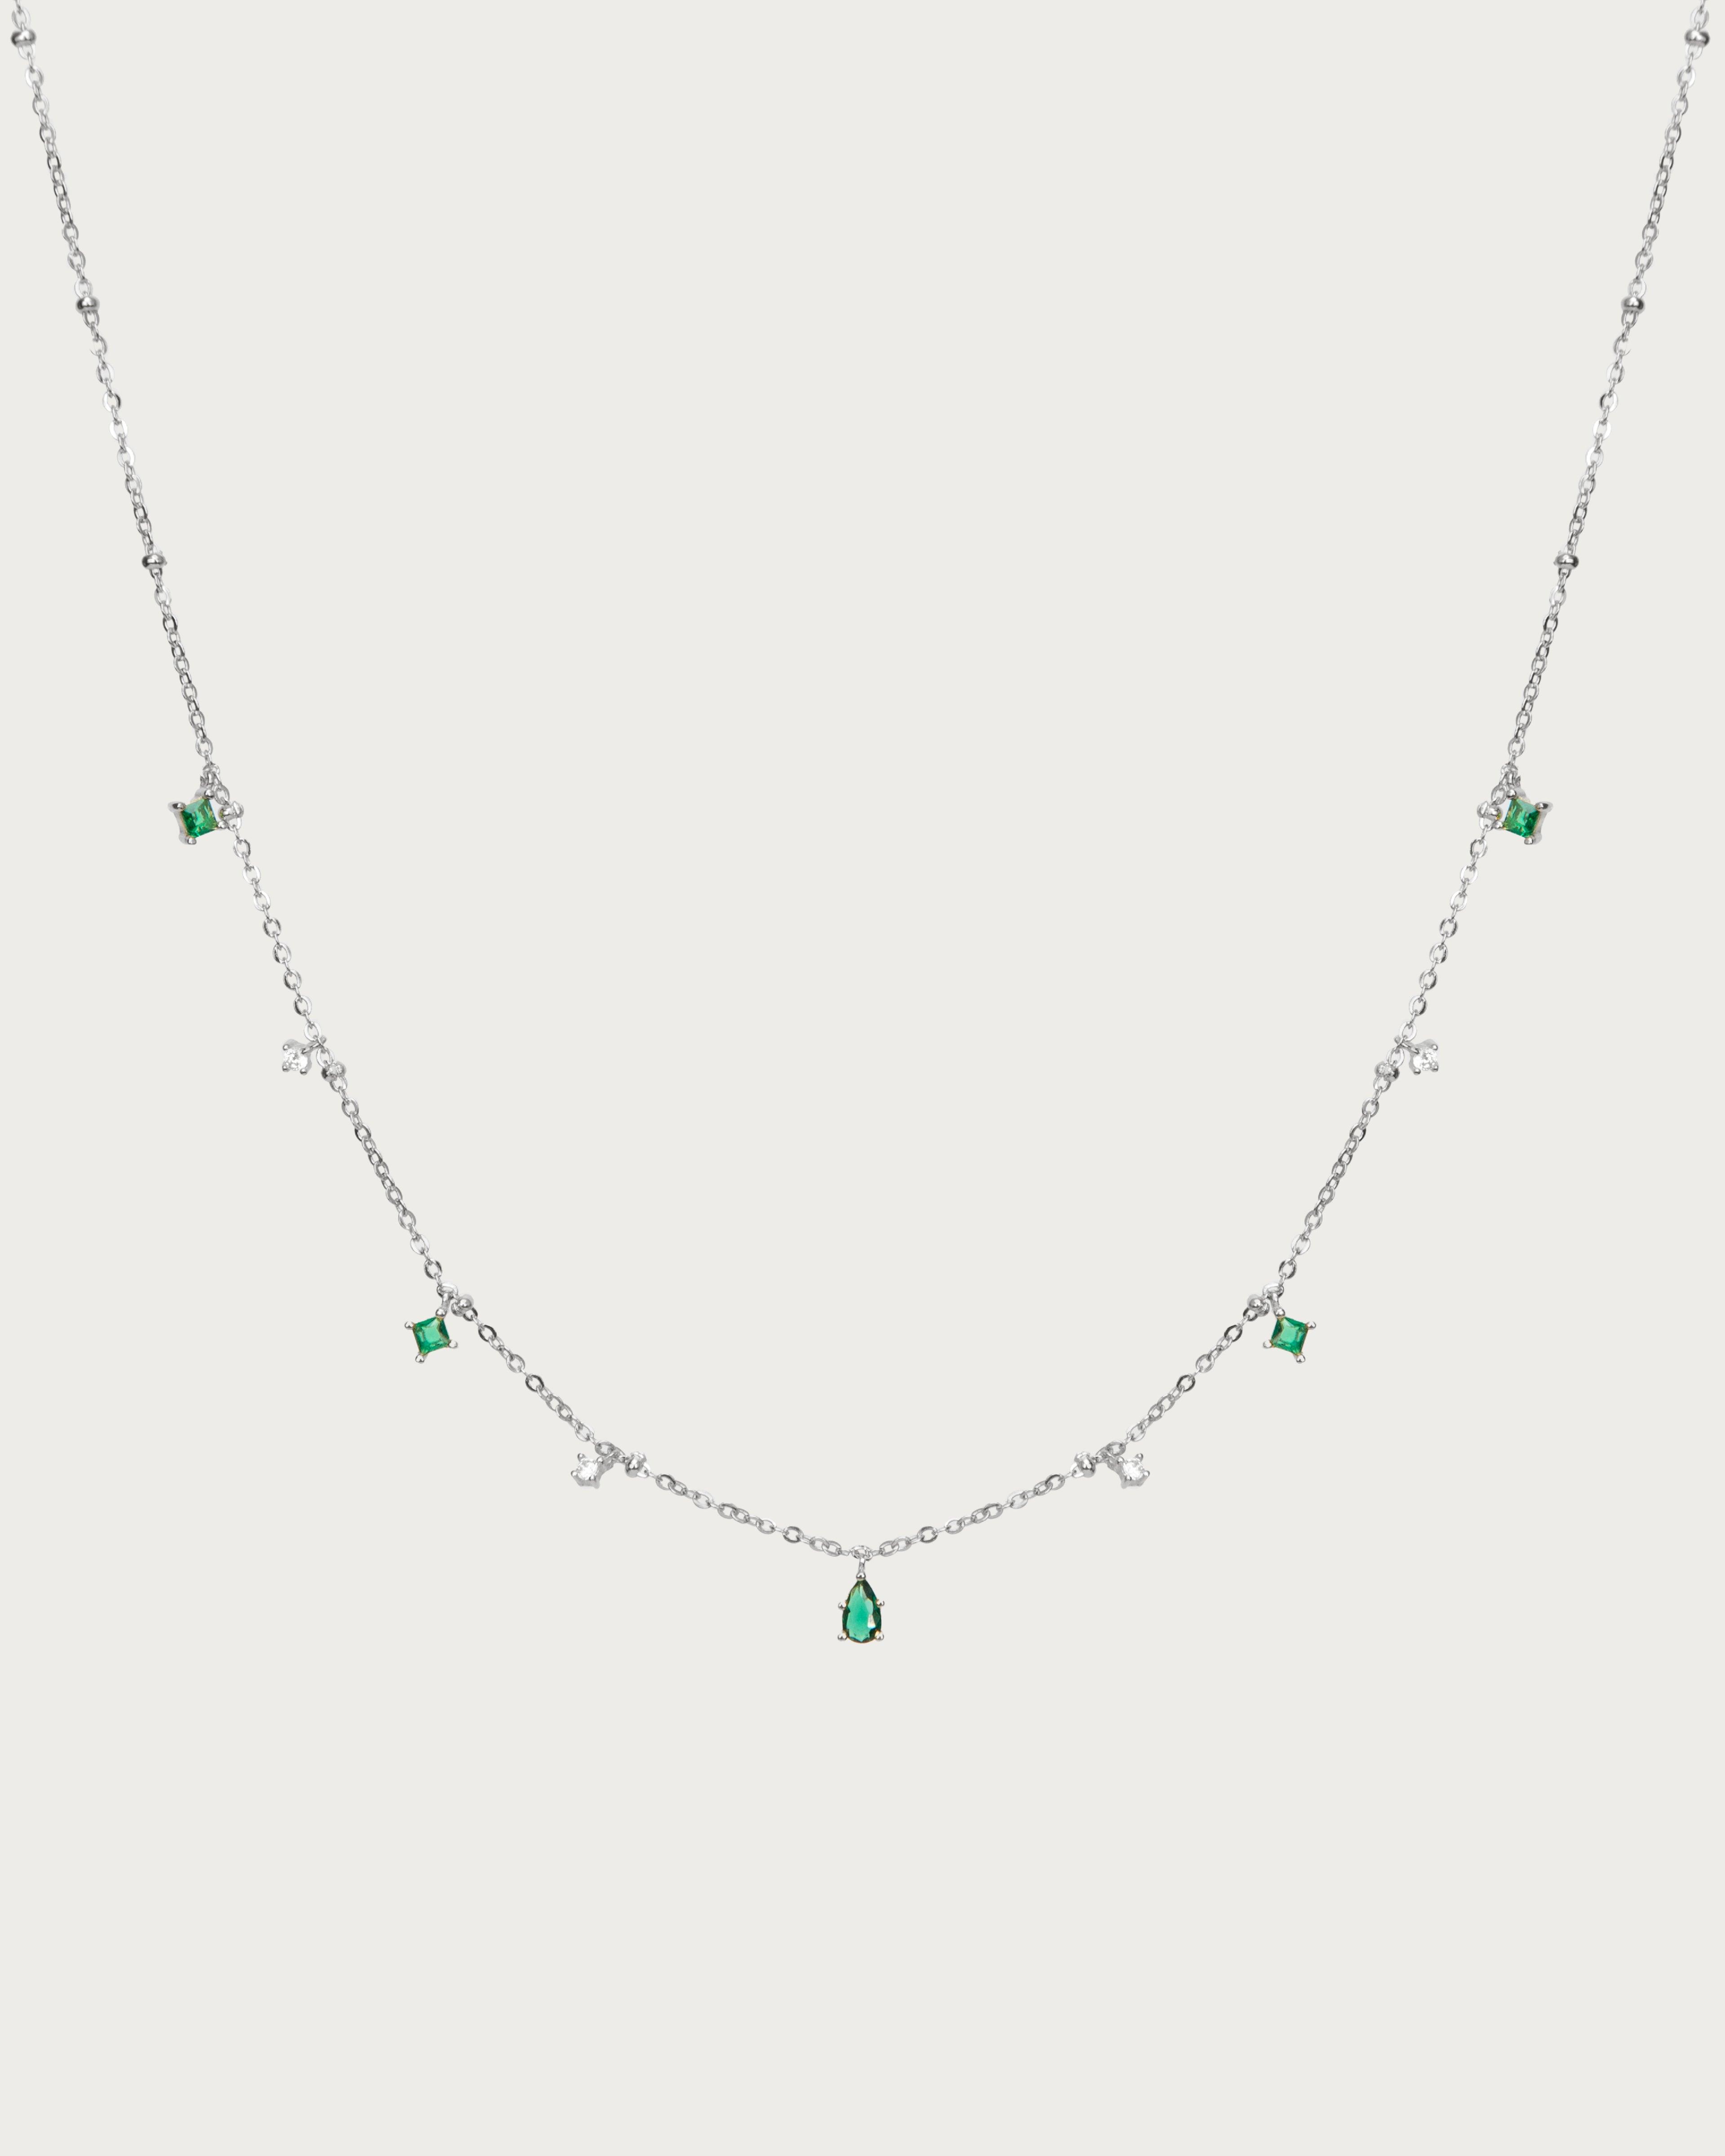 Silver Elysee Necklace in Emerald Green - En Route Jewelry